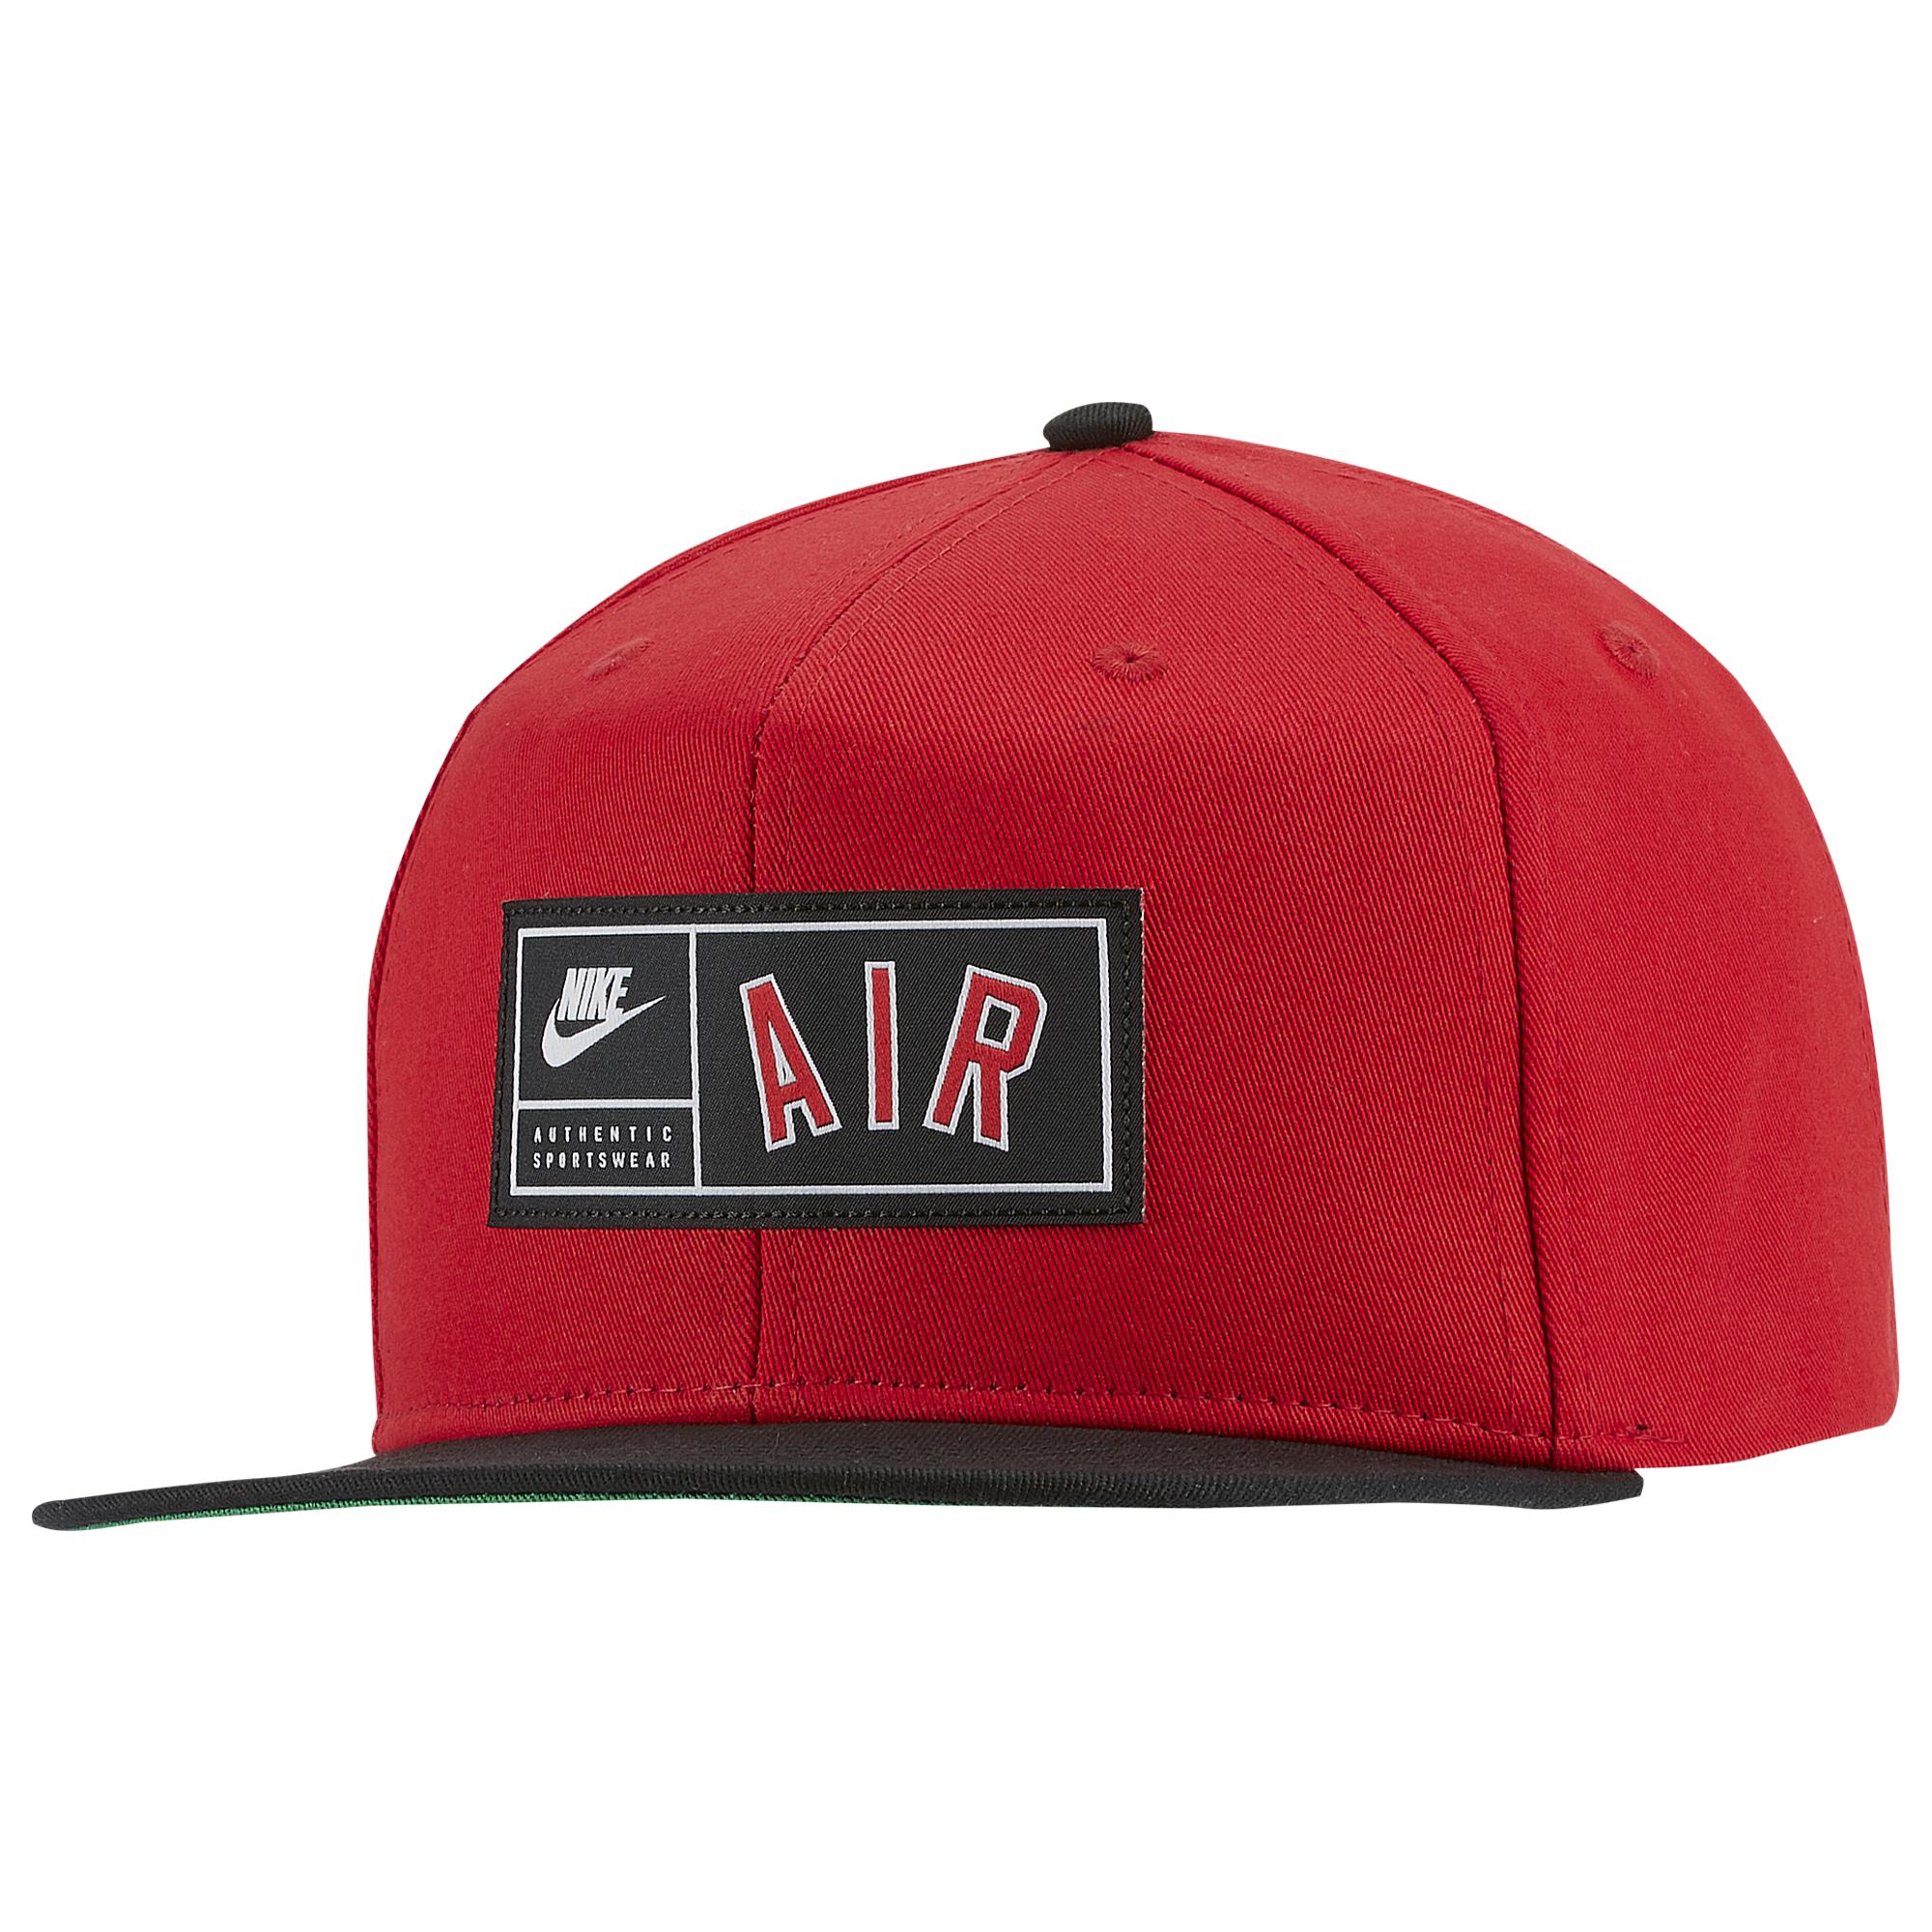 Nike Air Pro Cap in Red for Men - Lyst